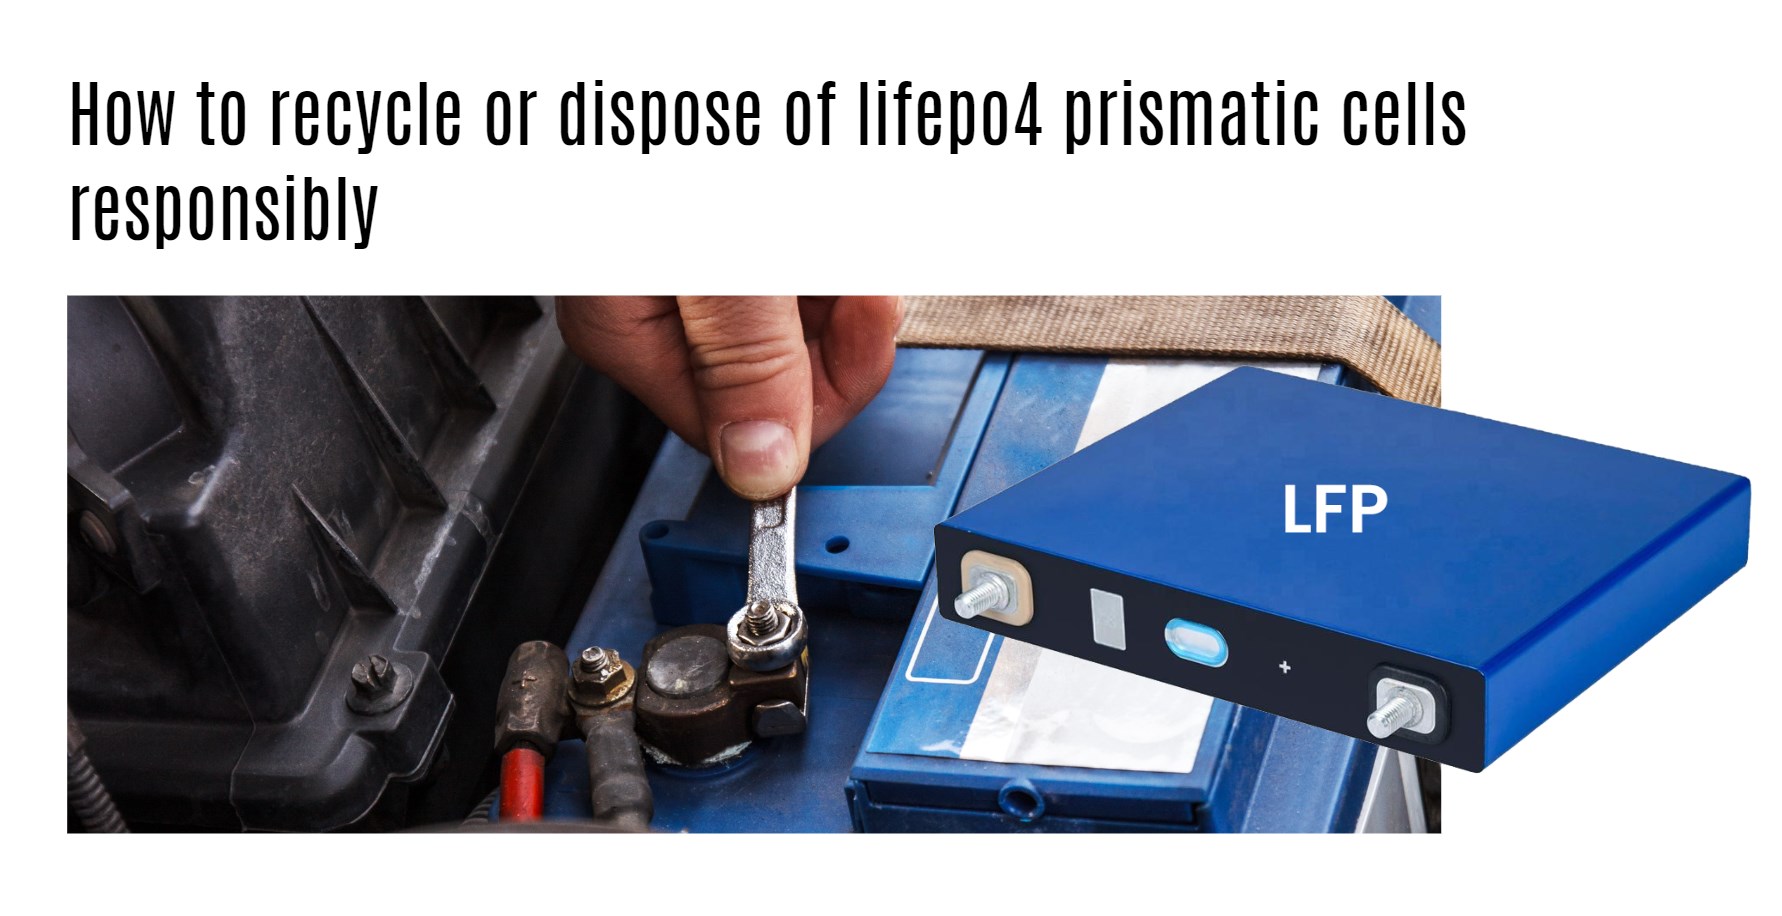 How to recycle or dispose of lifepo4 prismatic cells responsibly